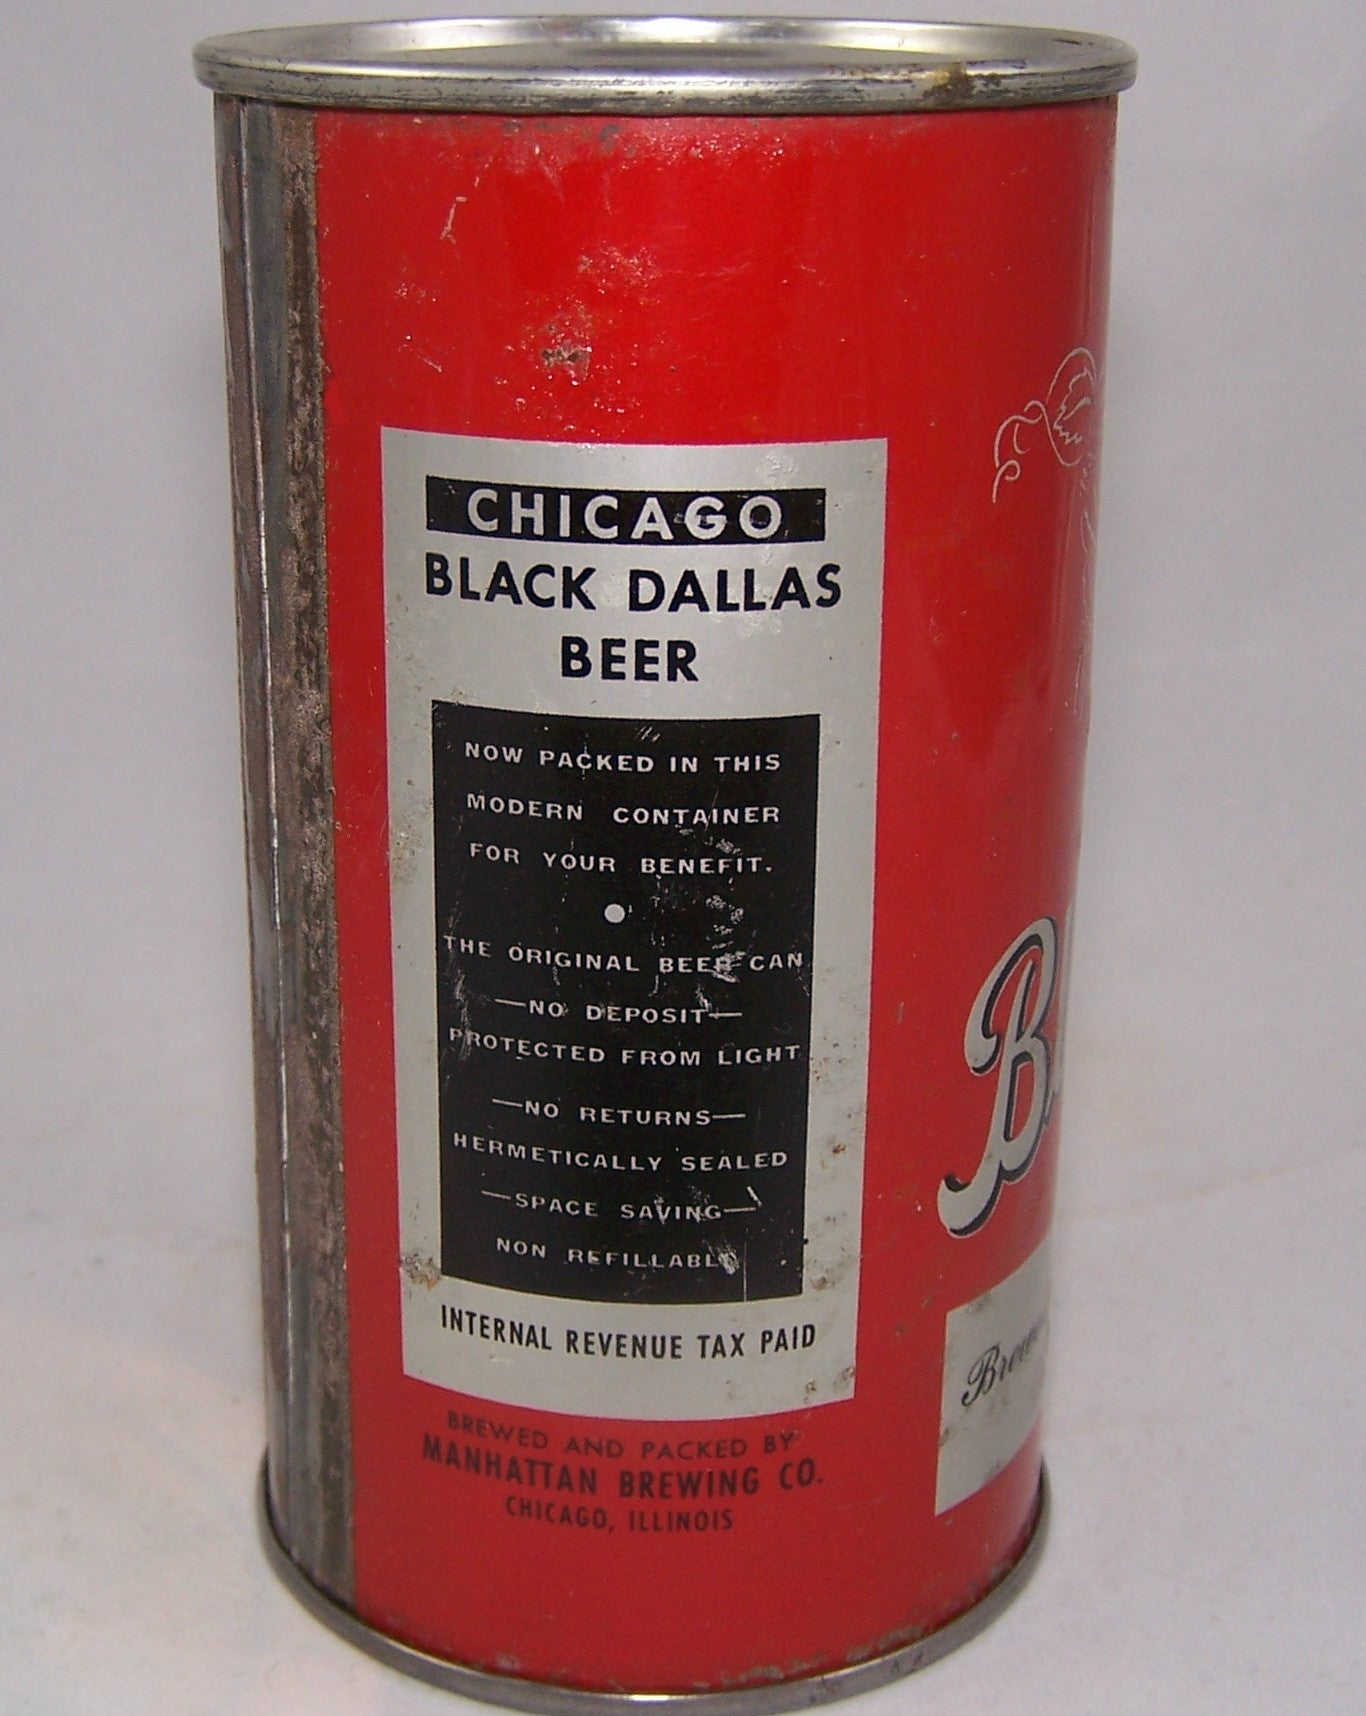 Chicago Black Dallas (Blacked out) Lilek # 113, Grade 1 -/2+Sold on 10/14/15